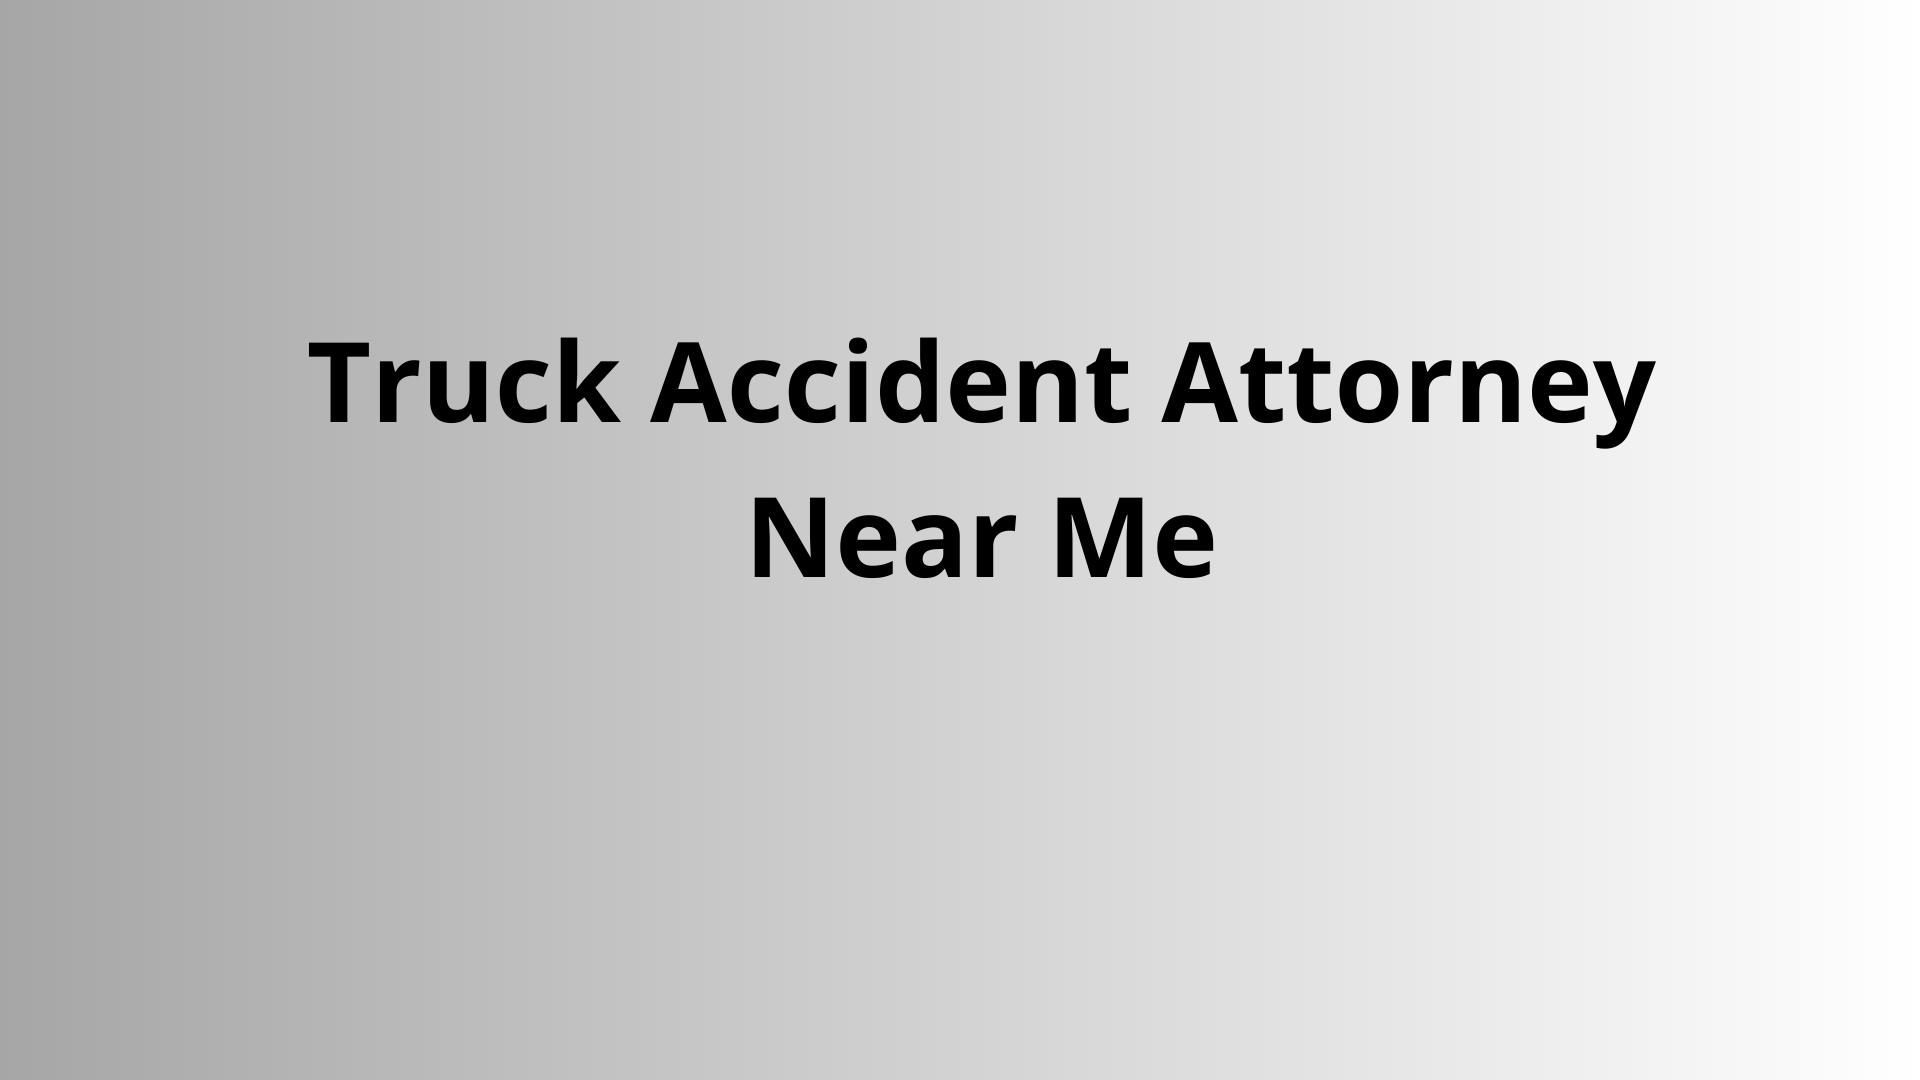 Truck Accident Attorney Near Me